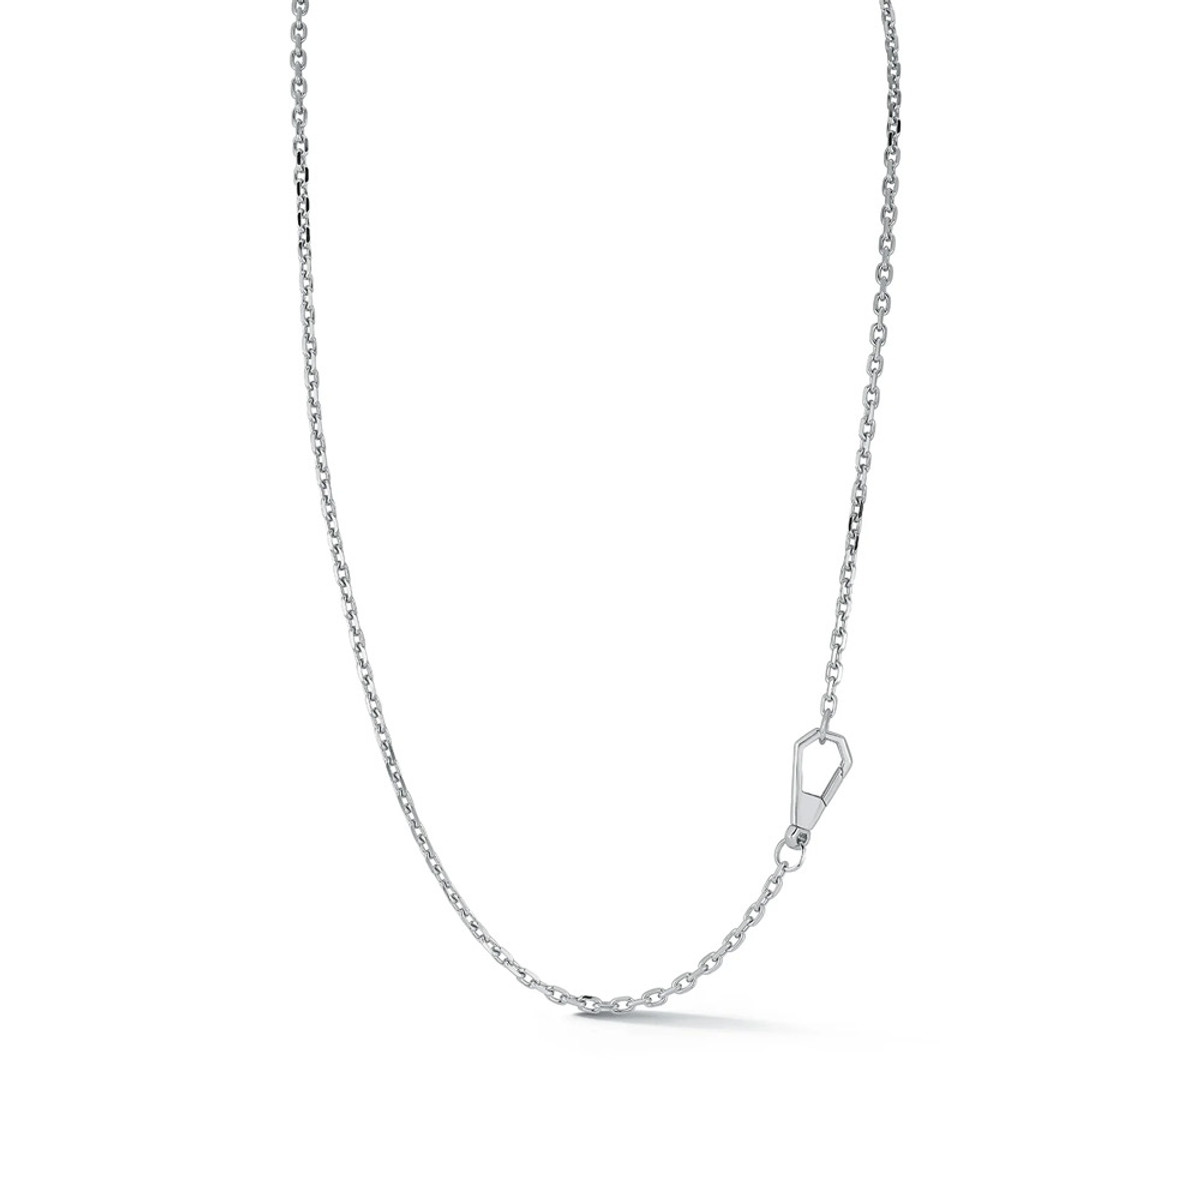 Walters Faith Carrington Sterling Silver Cable Chain Necklace with Swivel Clasp-56421 Product Image